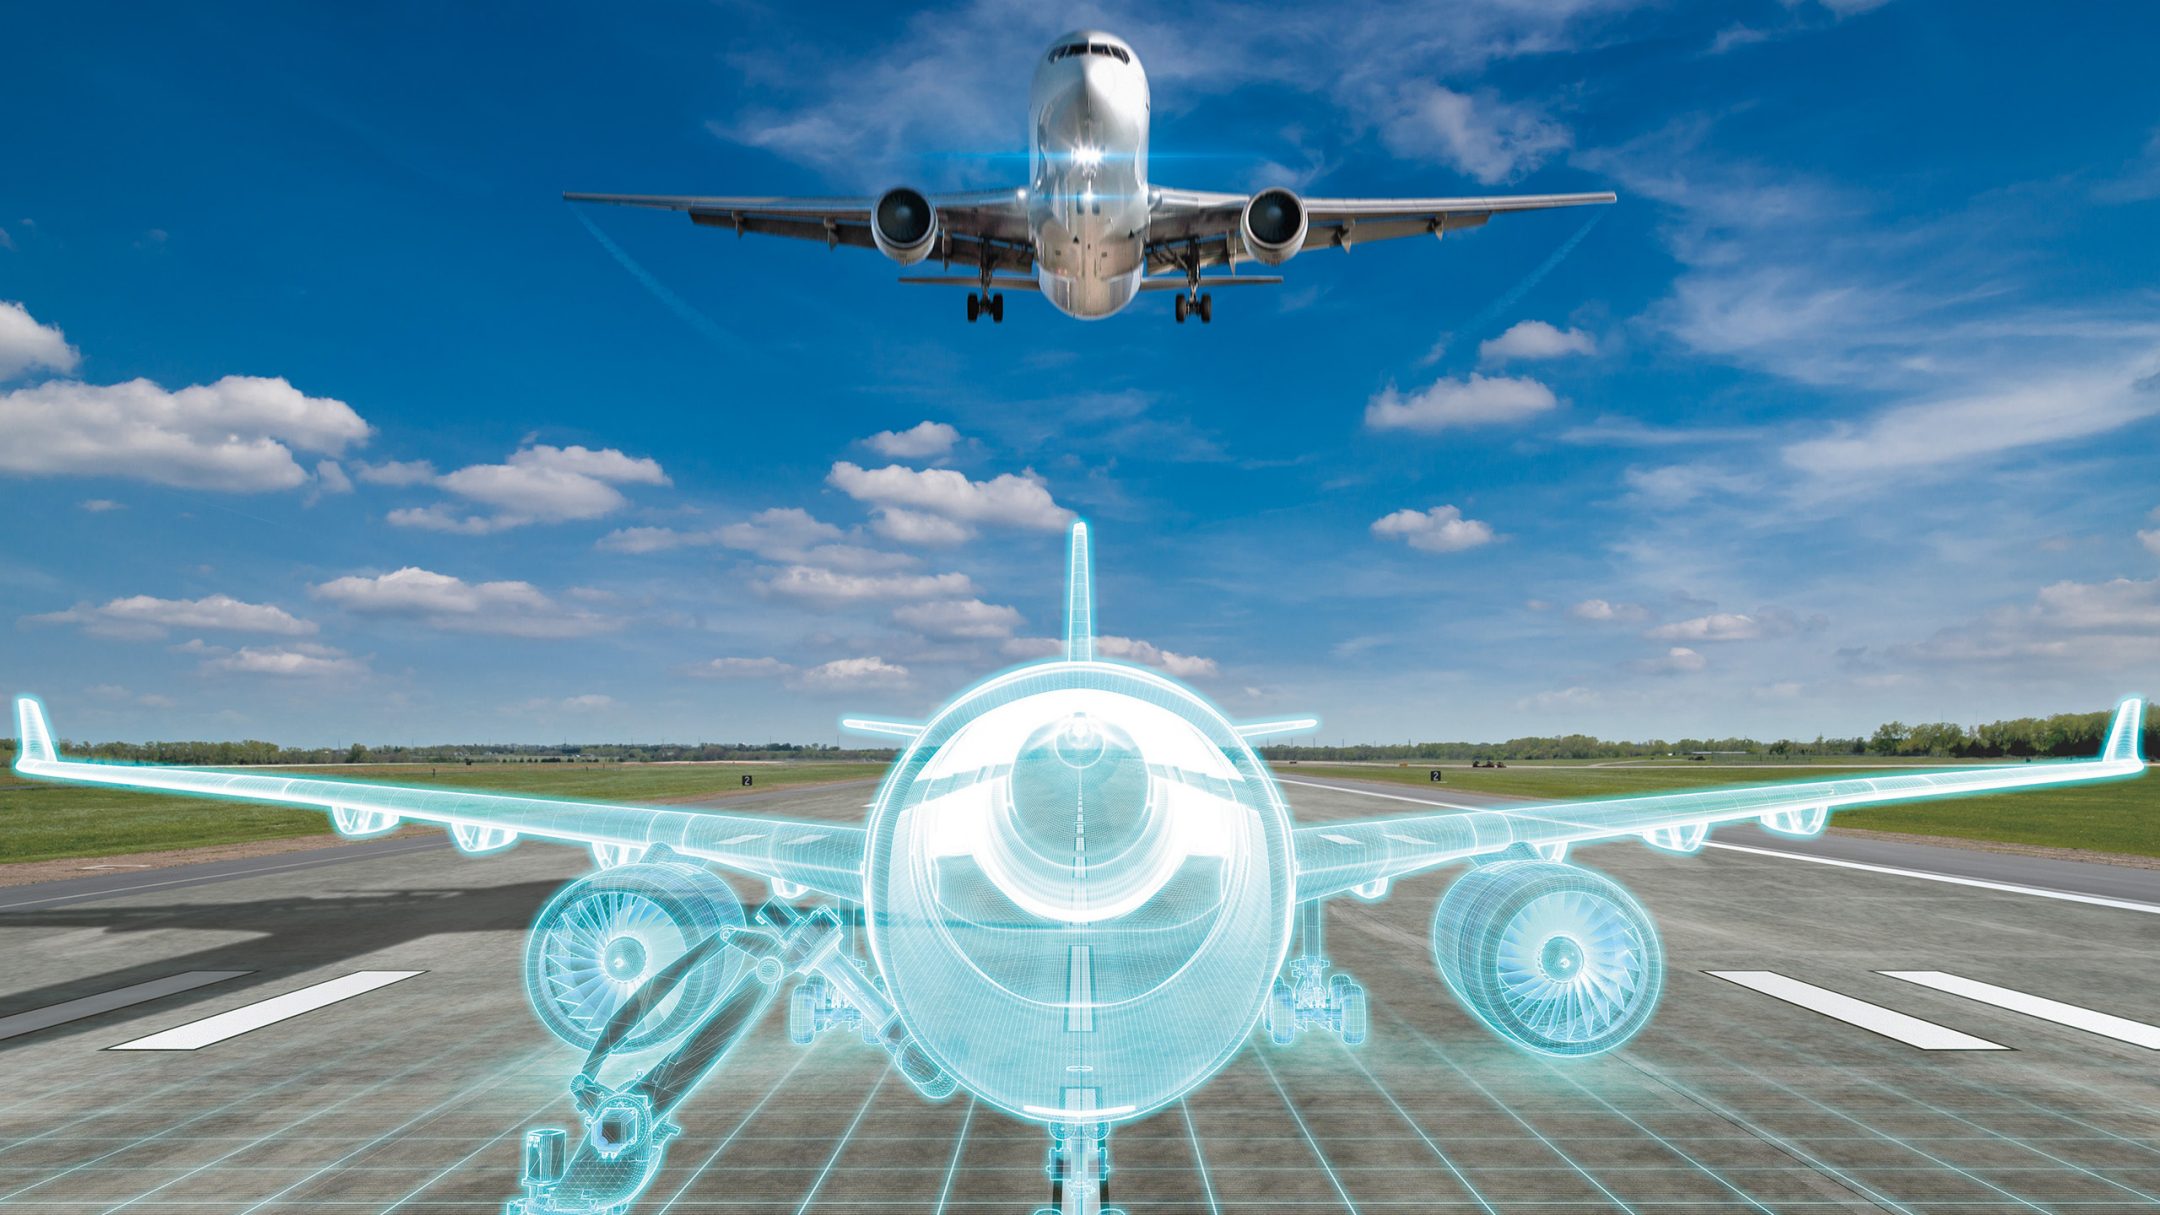 Image of a plane flying above a runway with a digital illustration of a plane below it on the runway.